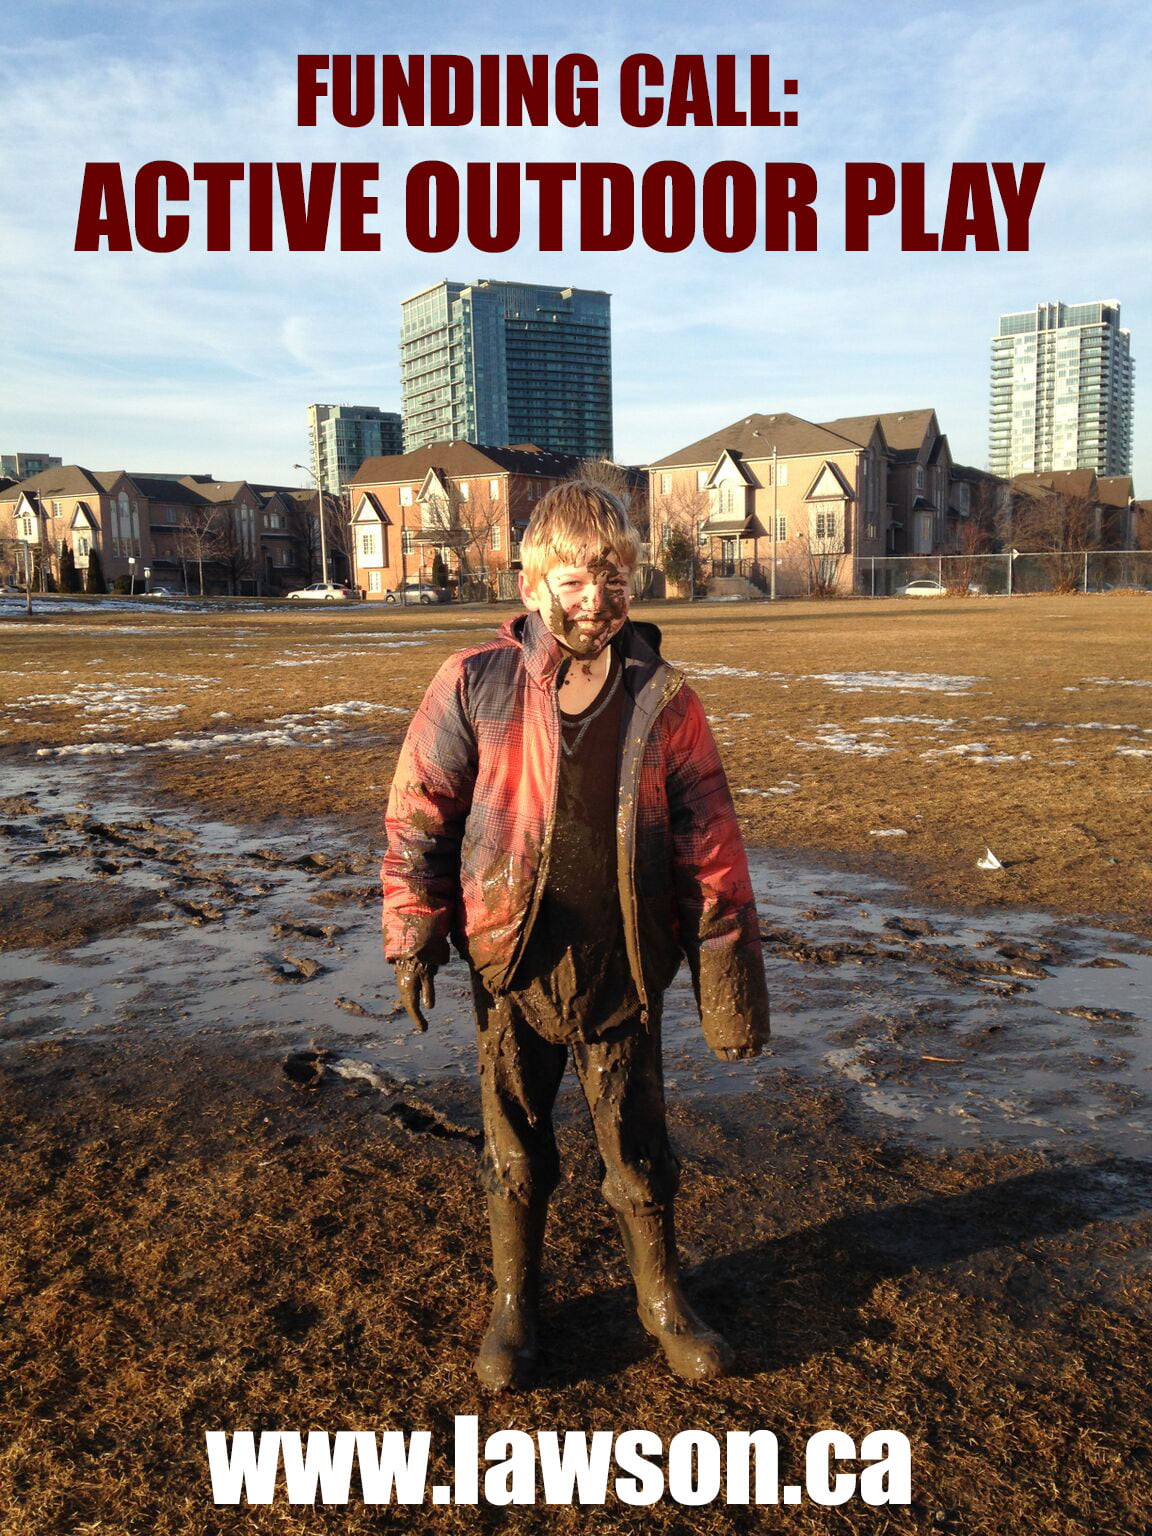 Lawson Foundation Active Outdoor Play Funding Call